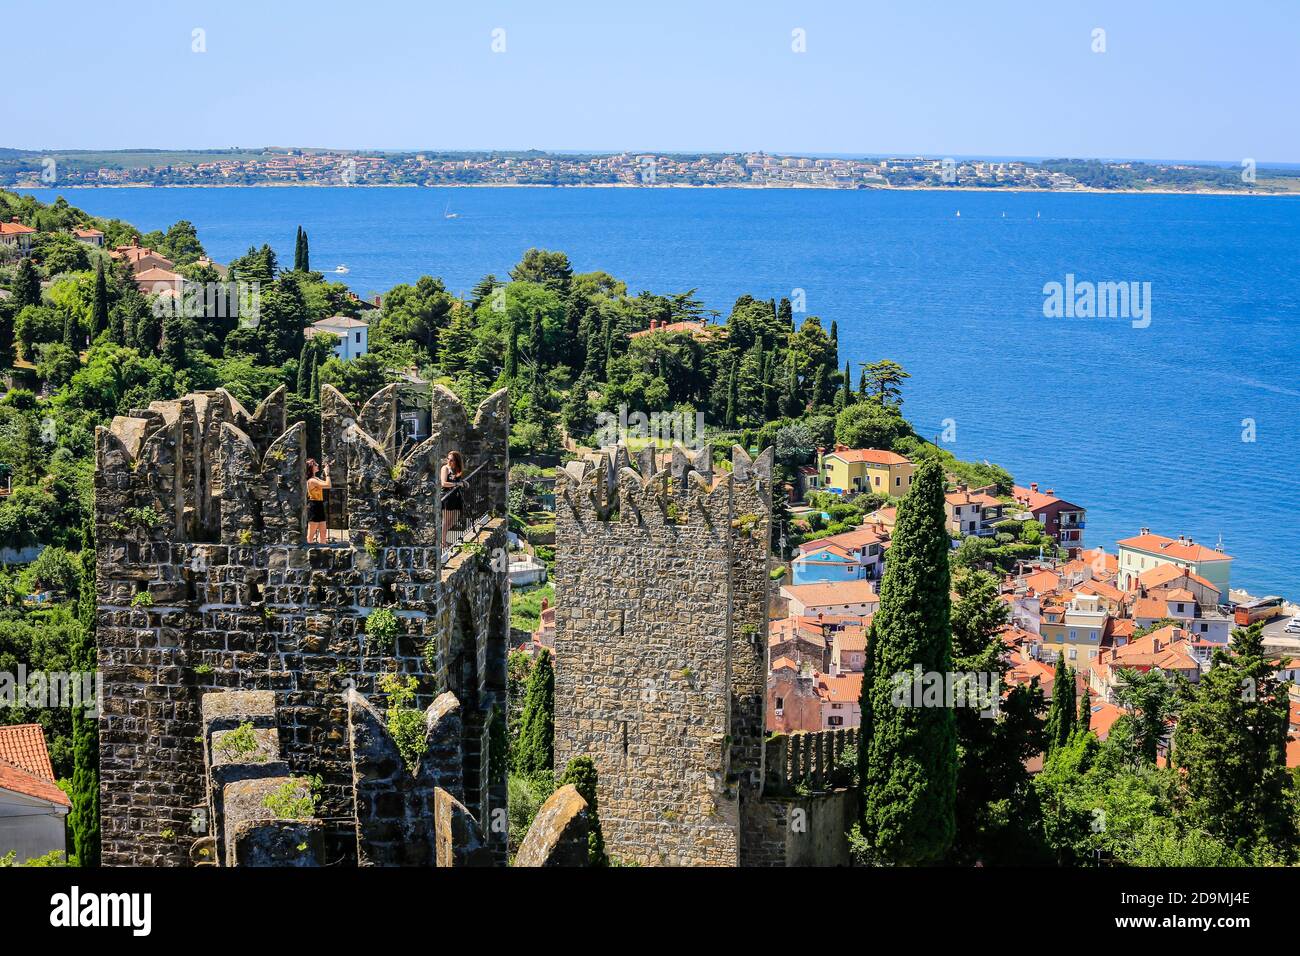 Piran, Istria, Slovenia - city overview, view over the city wall and the roofs of the port city on the Mediterranean Sea, tourists photograph themselves on the historic city wall. Stock Photo